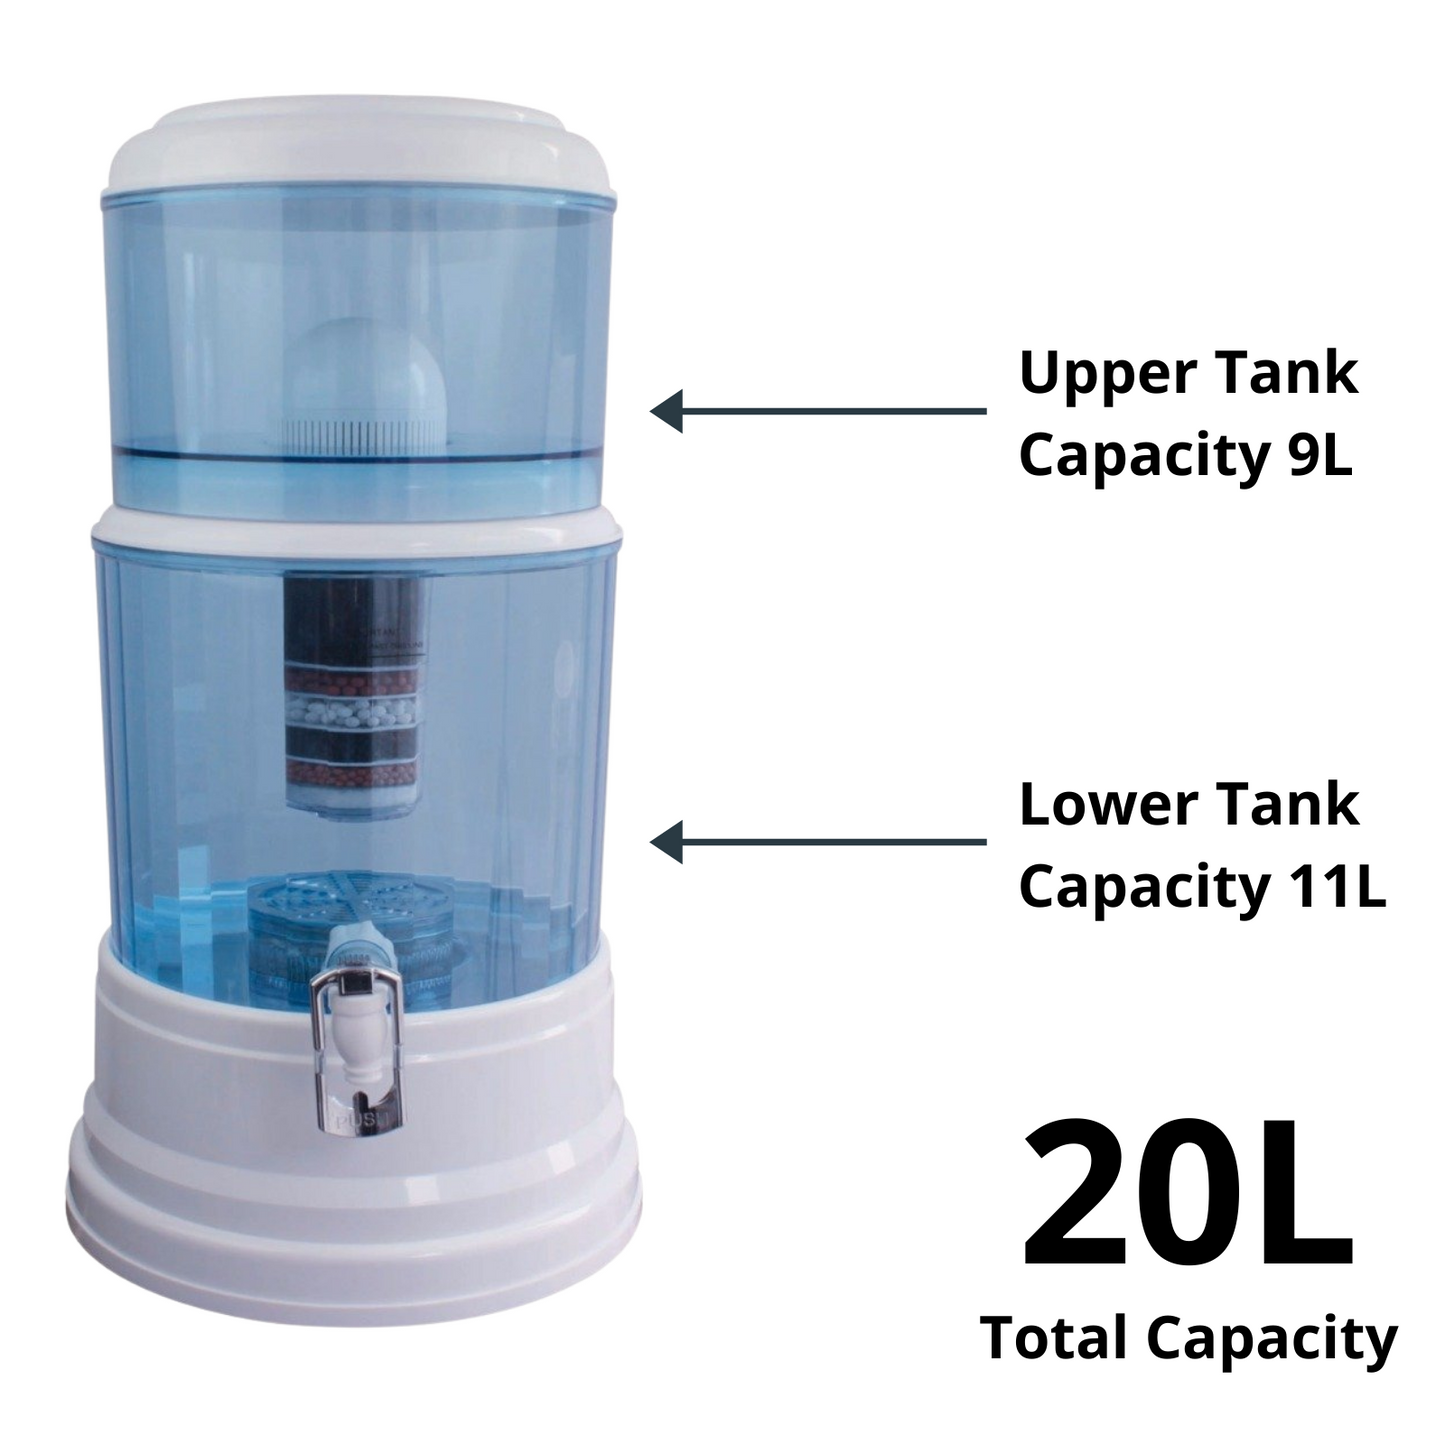 20L Water Dispenser Benchtop Purifier With 3 Fluoride Filters & Maifan Stone